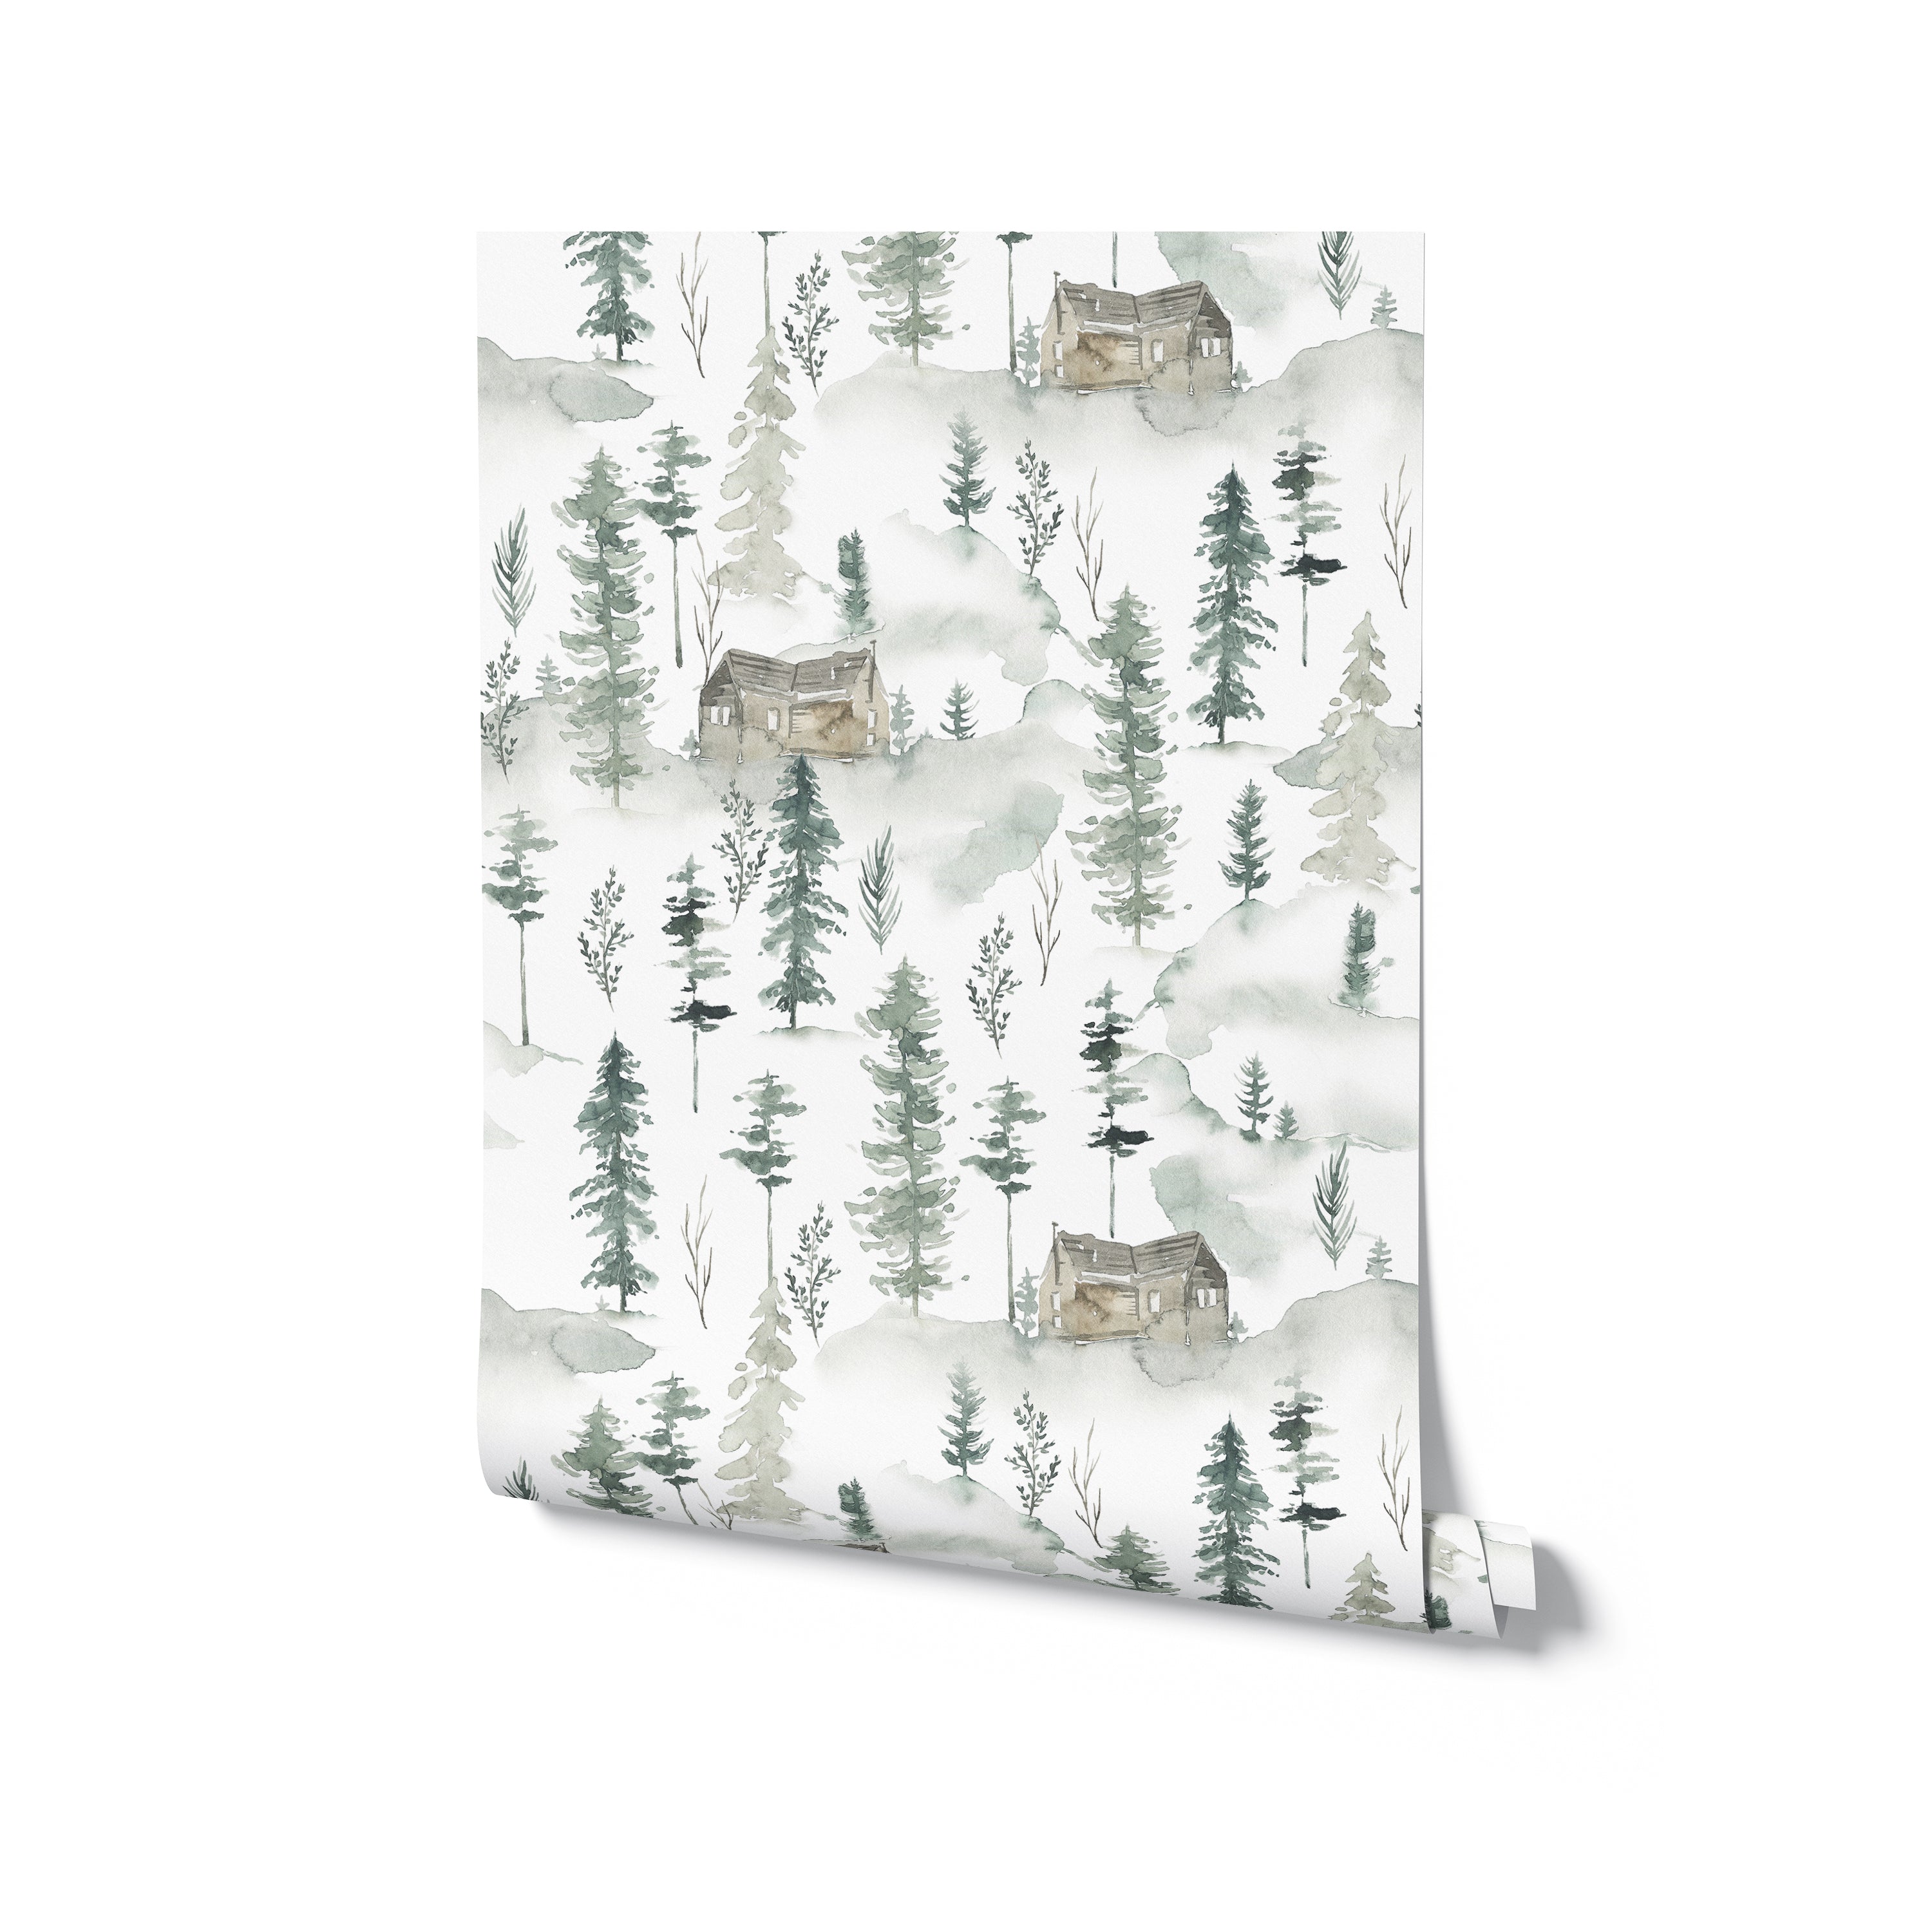 Rolled view of In the Woods Wallpaper, displaying detailed artwork of scattered pine trees and quaint woodland cabins in soft watercolor tones. This design brings a touch of nature's tranquility to any interior.